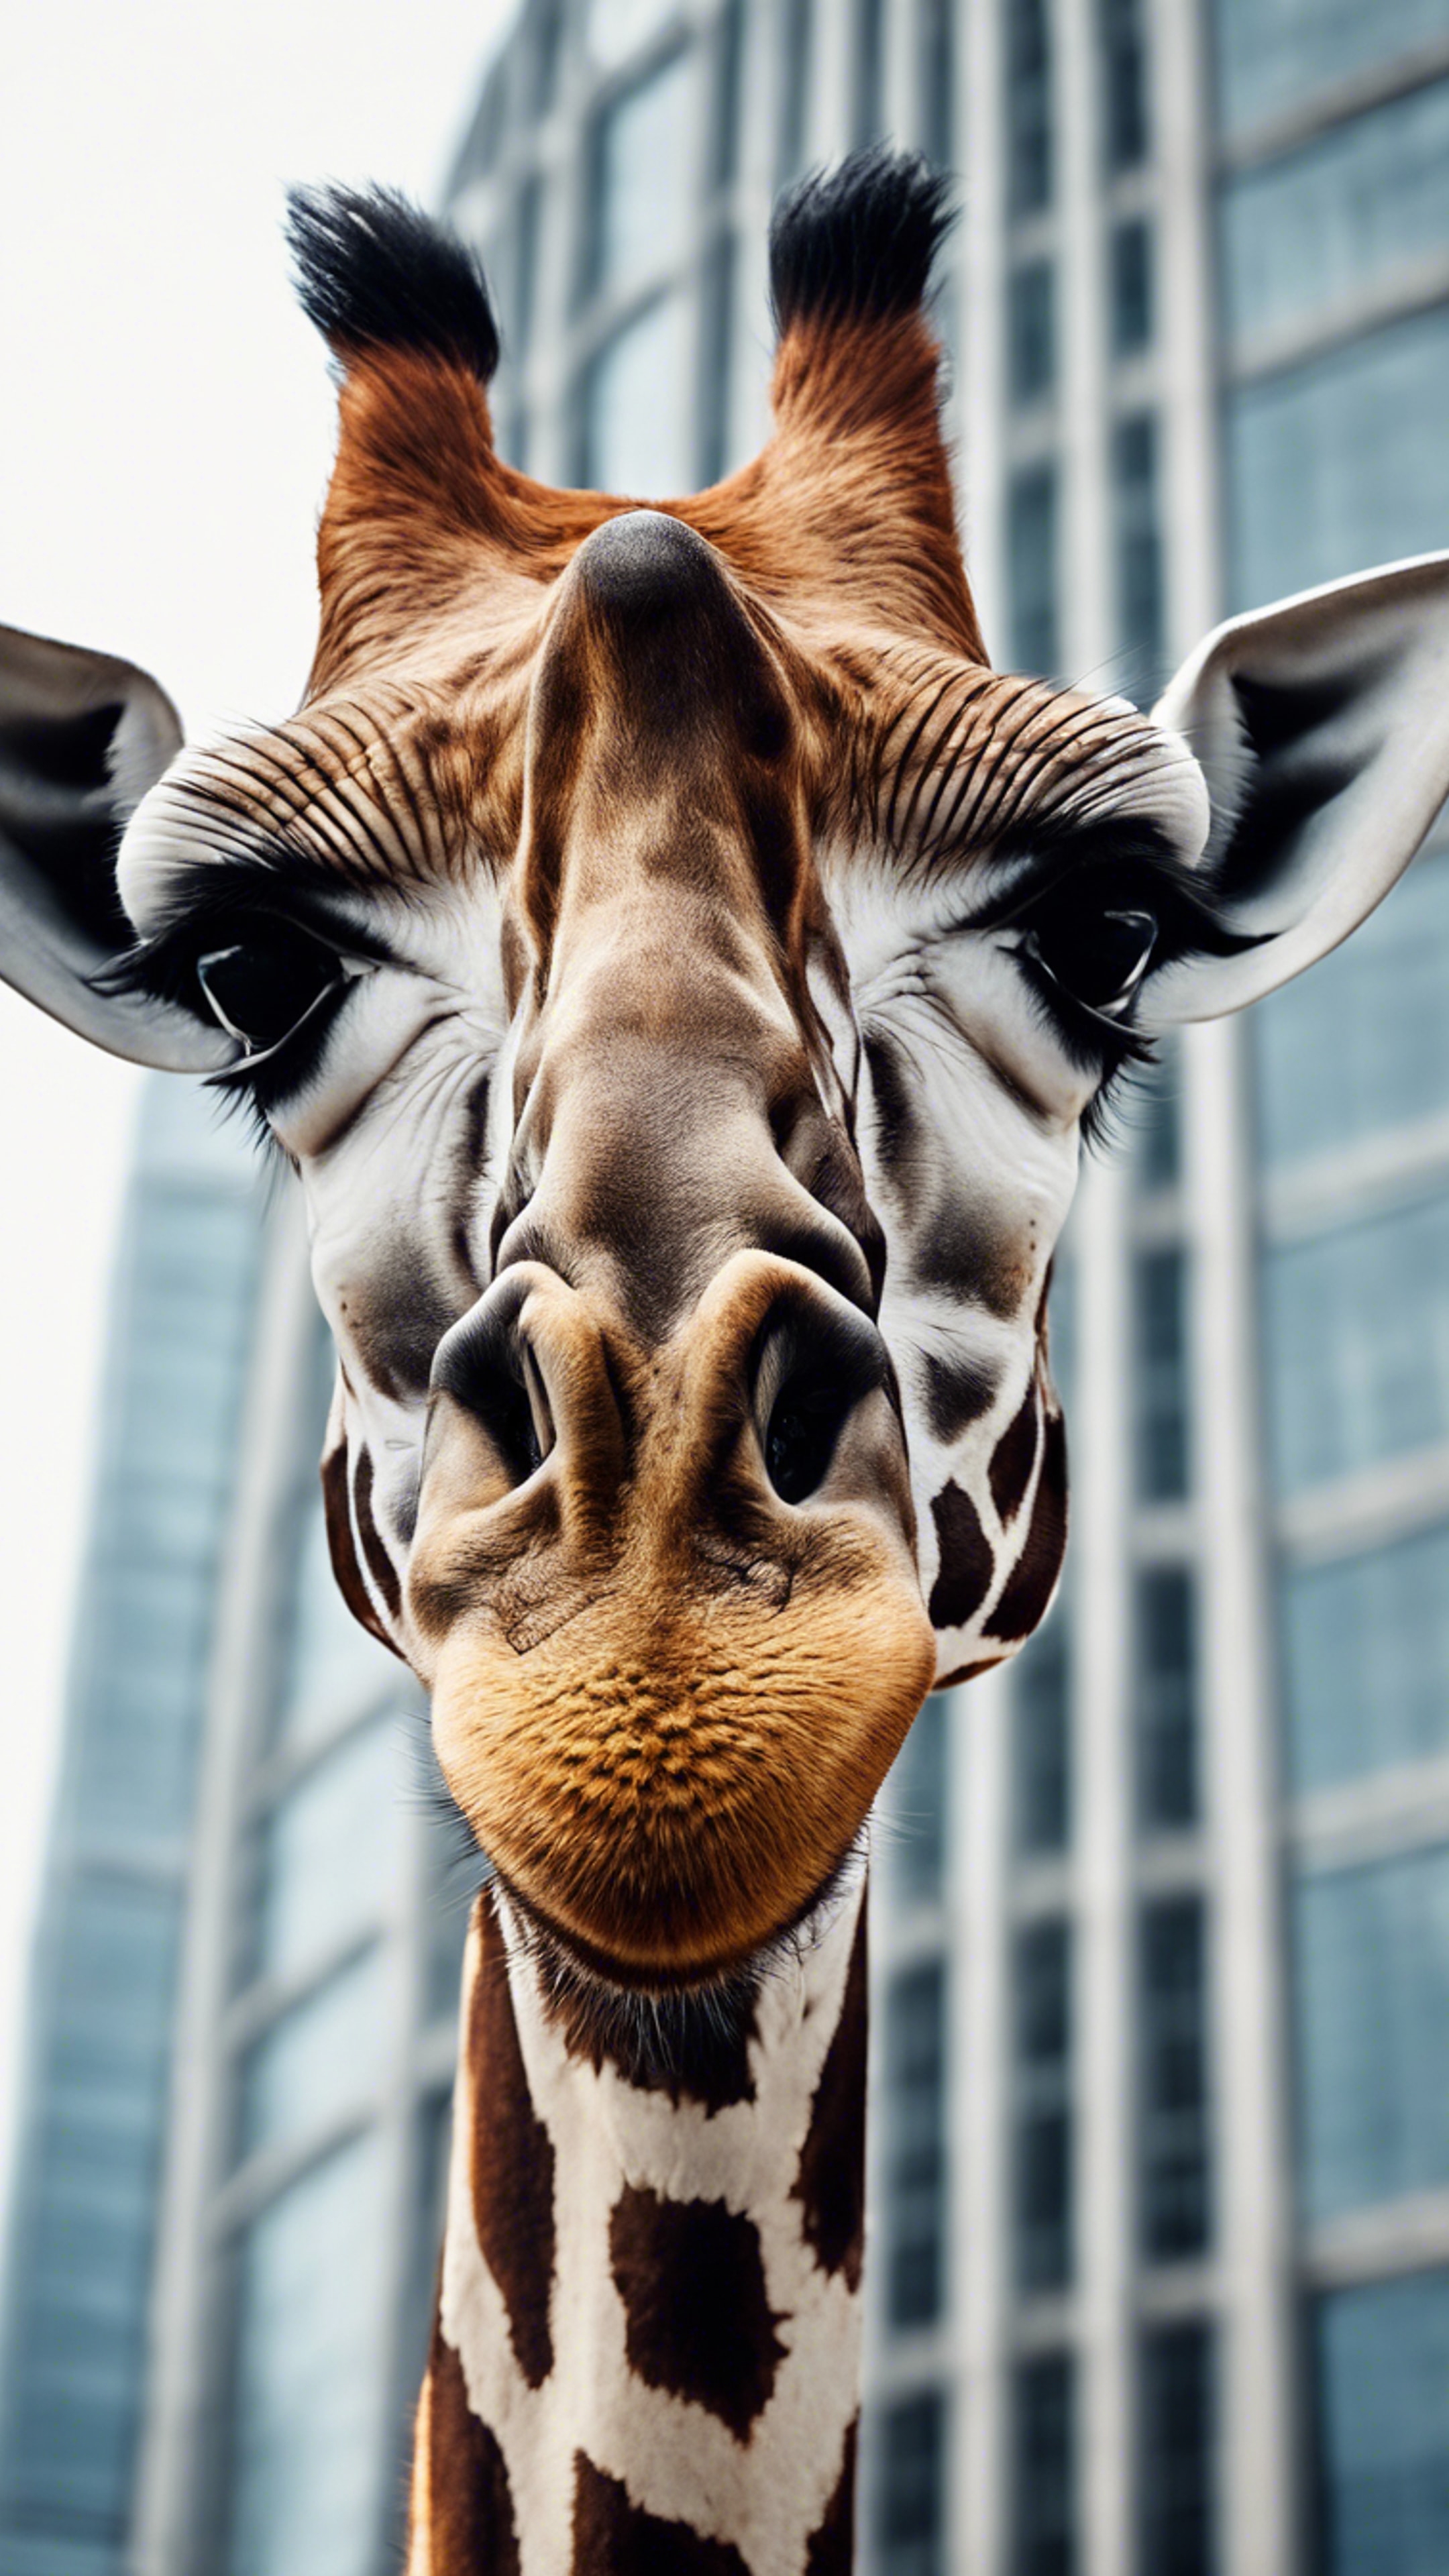 A giraffe in an urban setting, poking its head out from behind a skyscraper, symbolising wild nature confronting urbanisation. 墙纸[4646bbcdc786429d9f19]